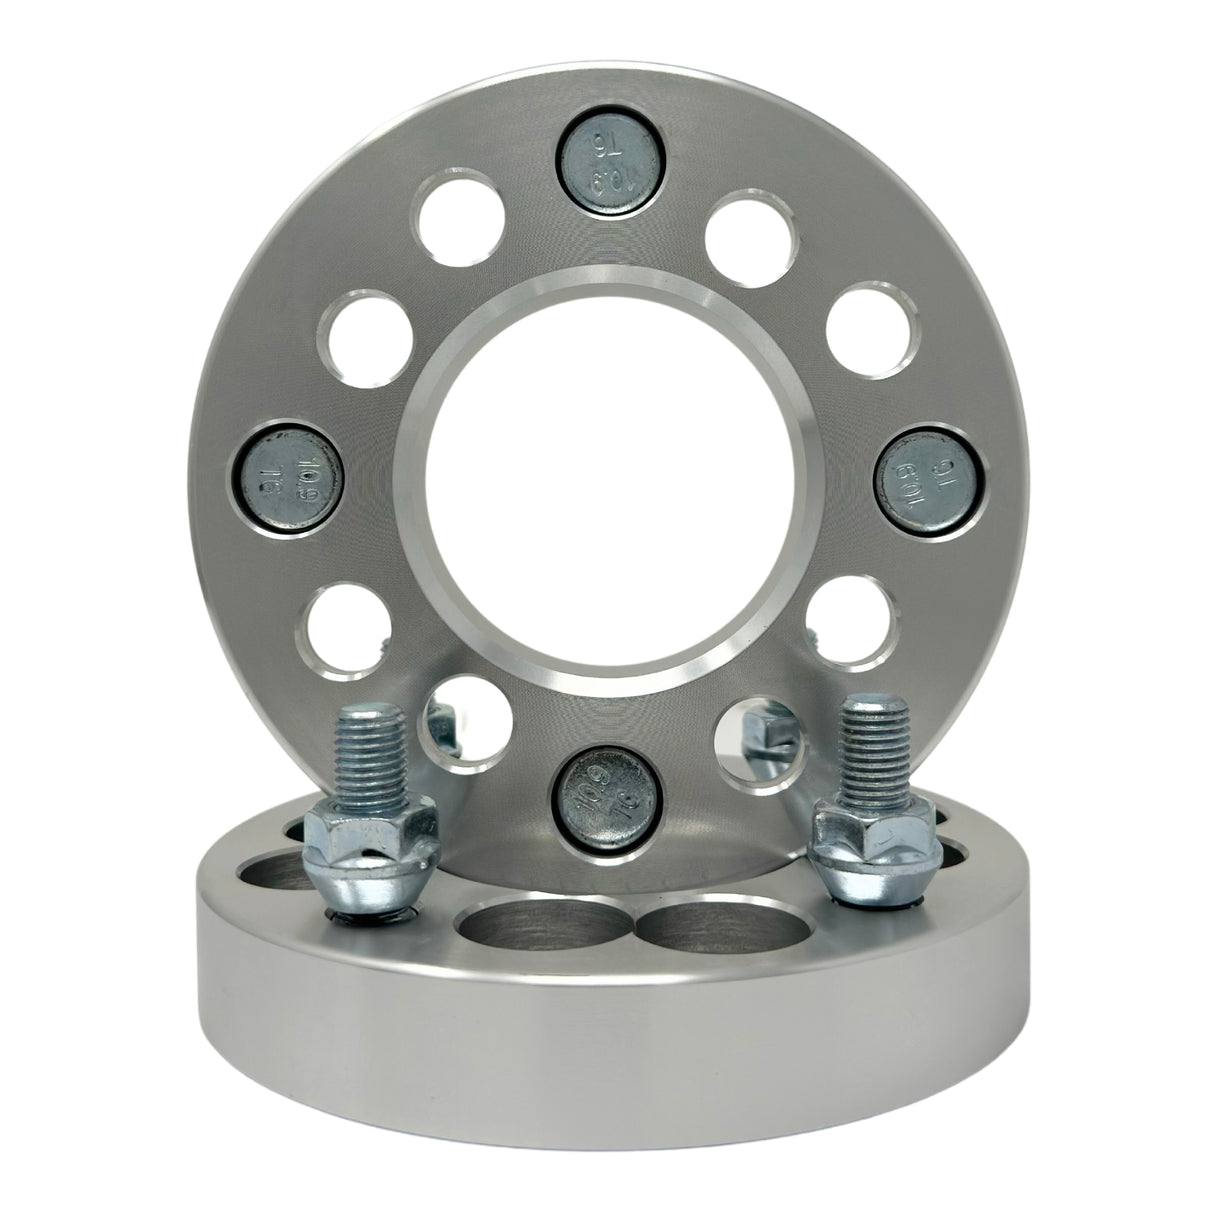 4x100 or 4x4.5 to 4x108 Wheel Adapters Universal Kit 1" Inch (25mm) 12x1.5 Studs & Lug Nuts 71mm Center Bore or 4x100 or 4x114.3 to 4x4.25